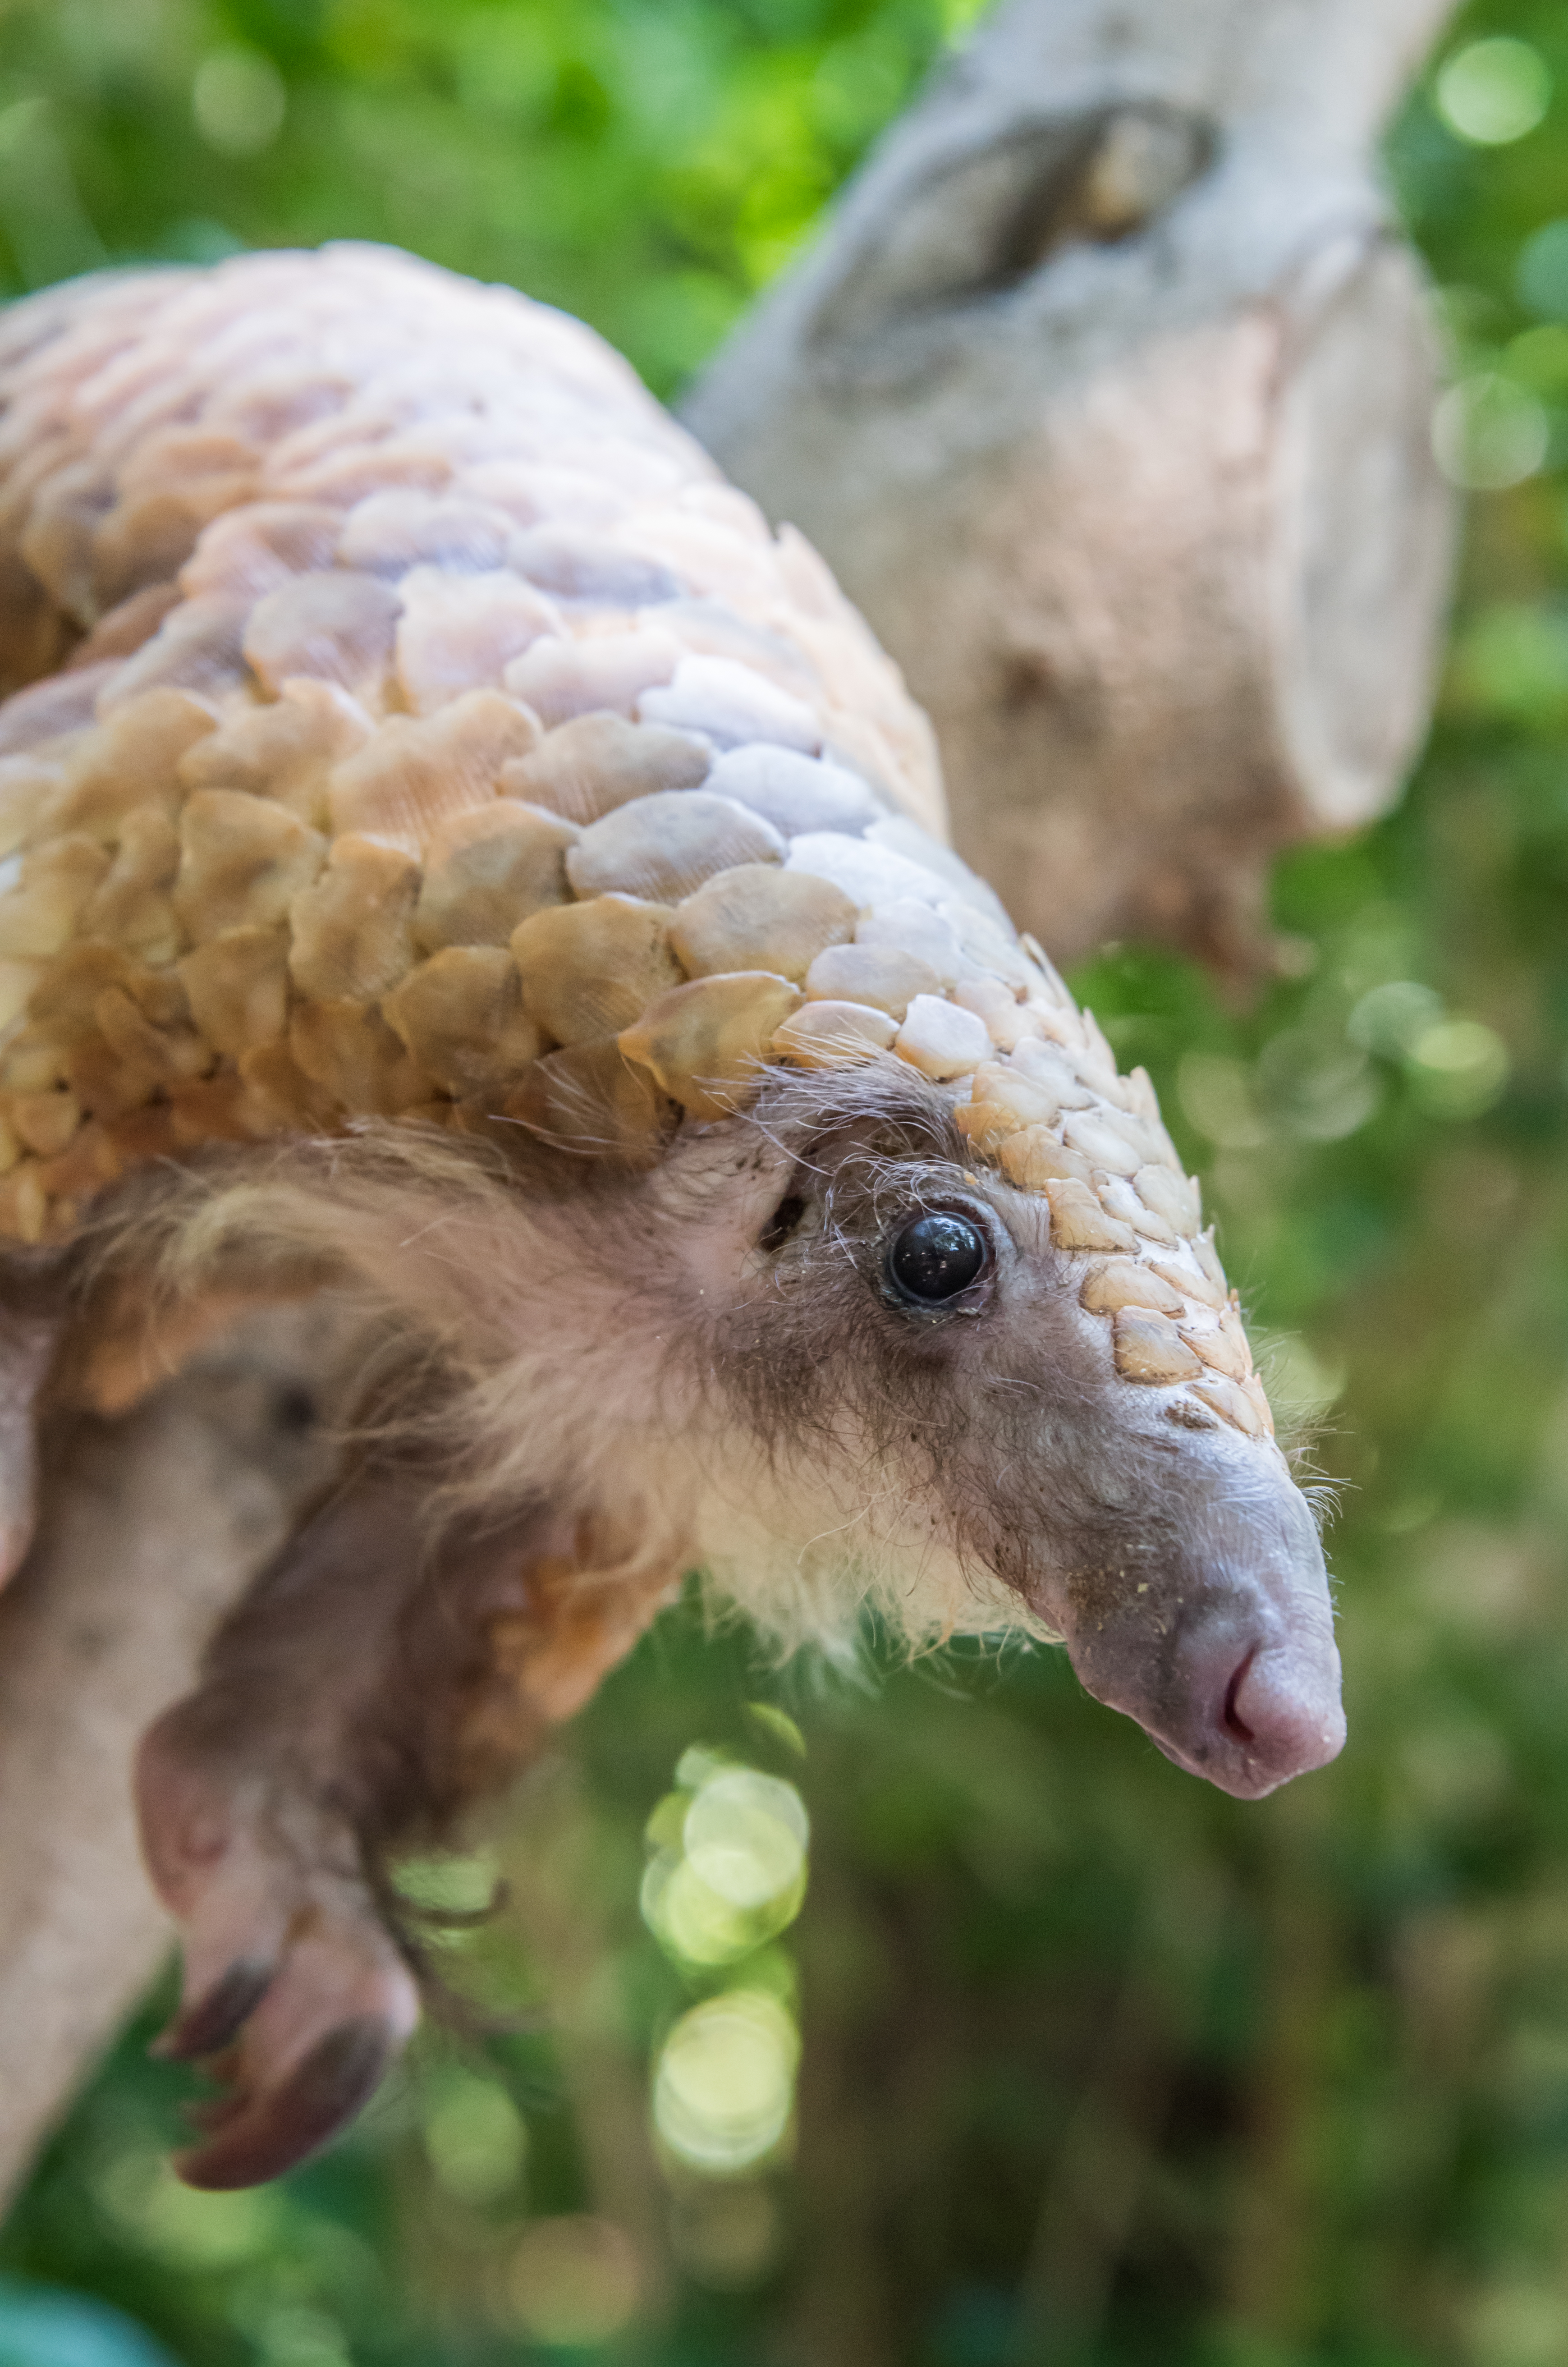 Close-up of a white-bellied pangolin in a tree, showing its long nose, hairy face and chin, powerful claws, and scale-covered body.